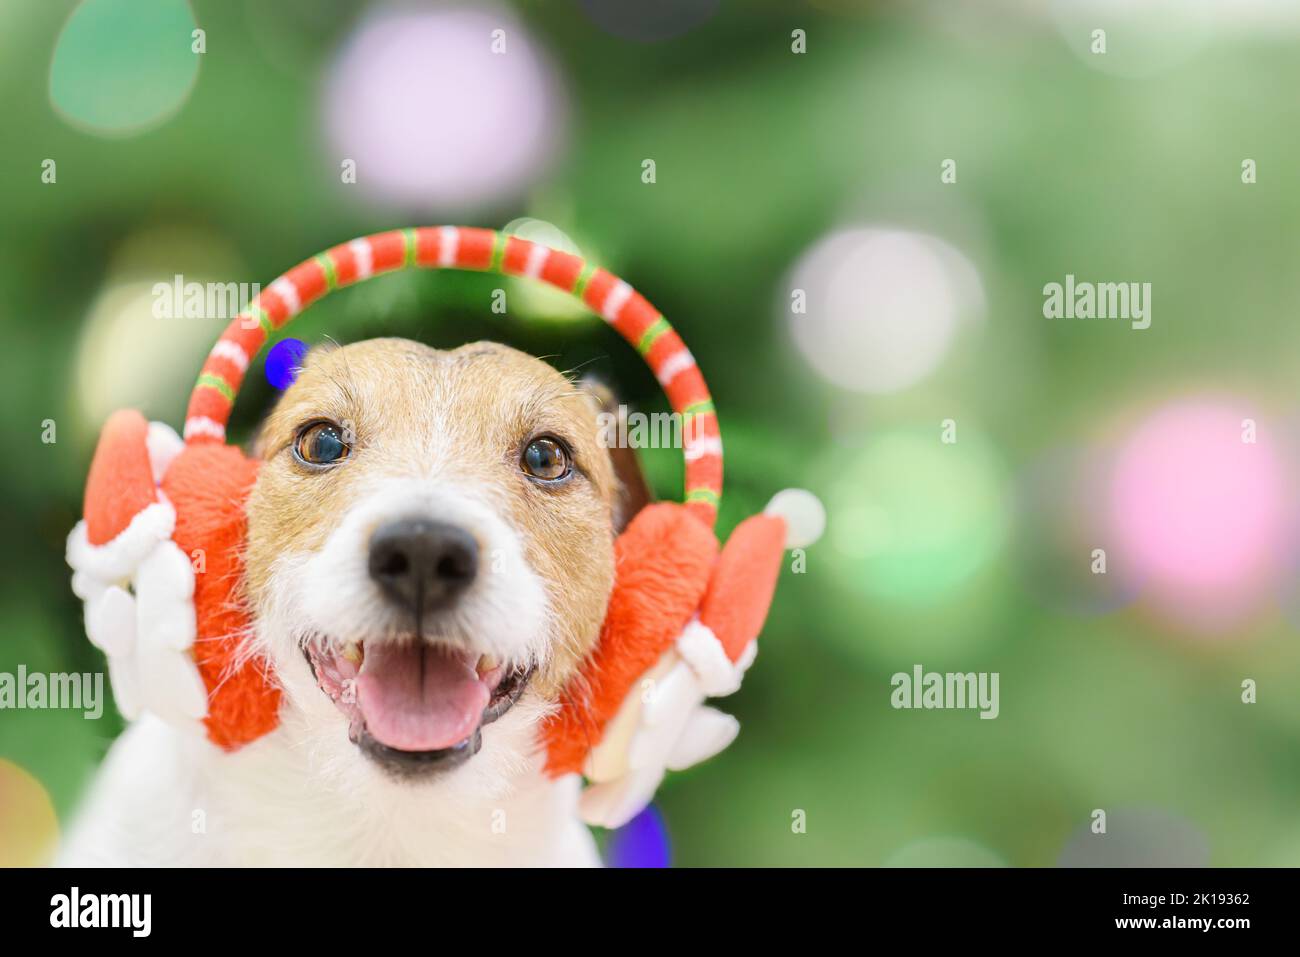 Amusing dog wearing Christmas ear muffs with Santa Clauses as holiday costume Stock Photo